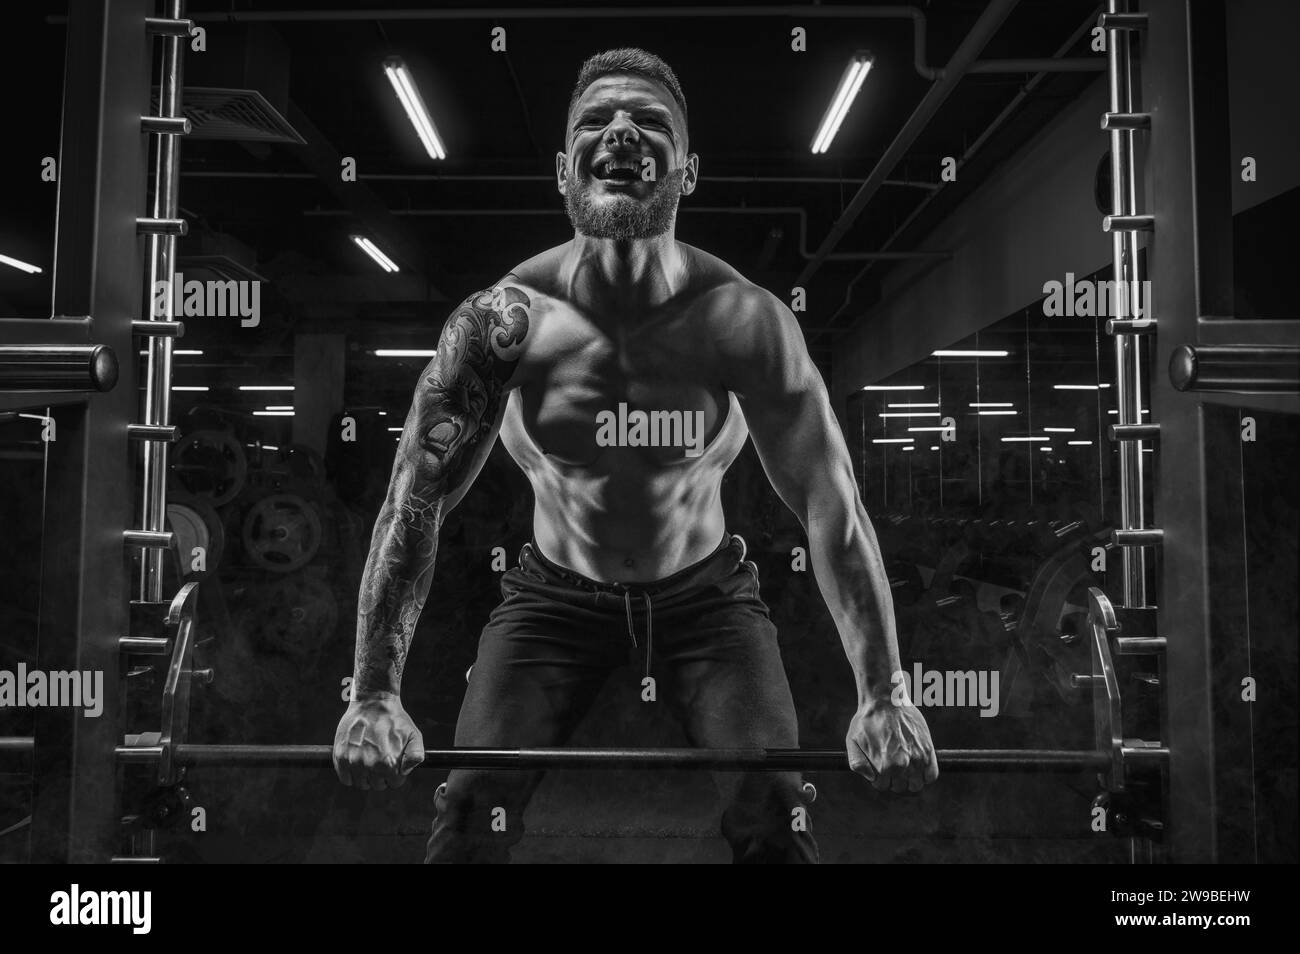 Portrait of an athlete performing a deadlift in the gym. Bodybuilding and fitness concept. Mixed media Stock Photo